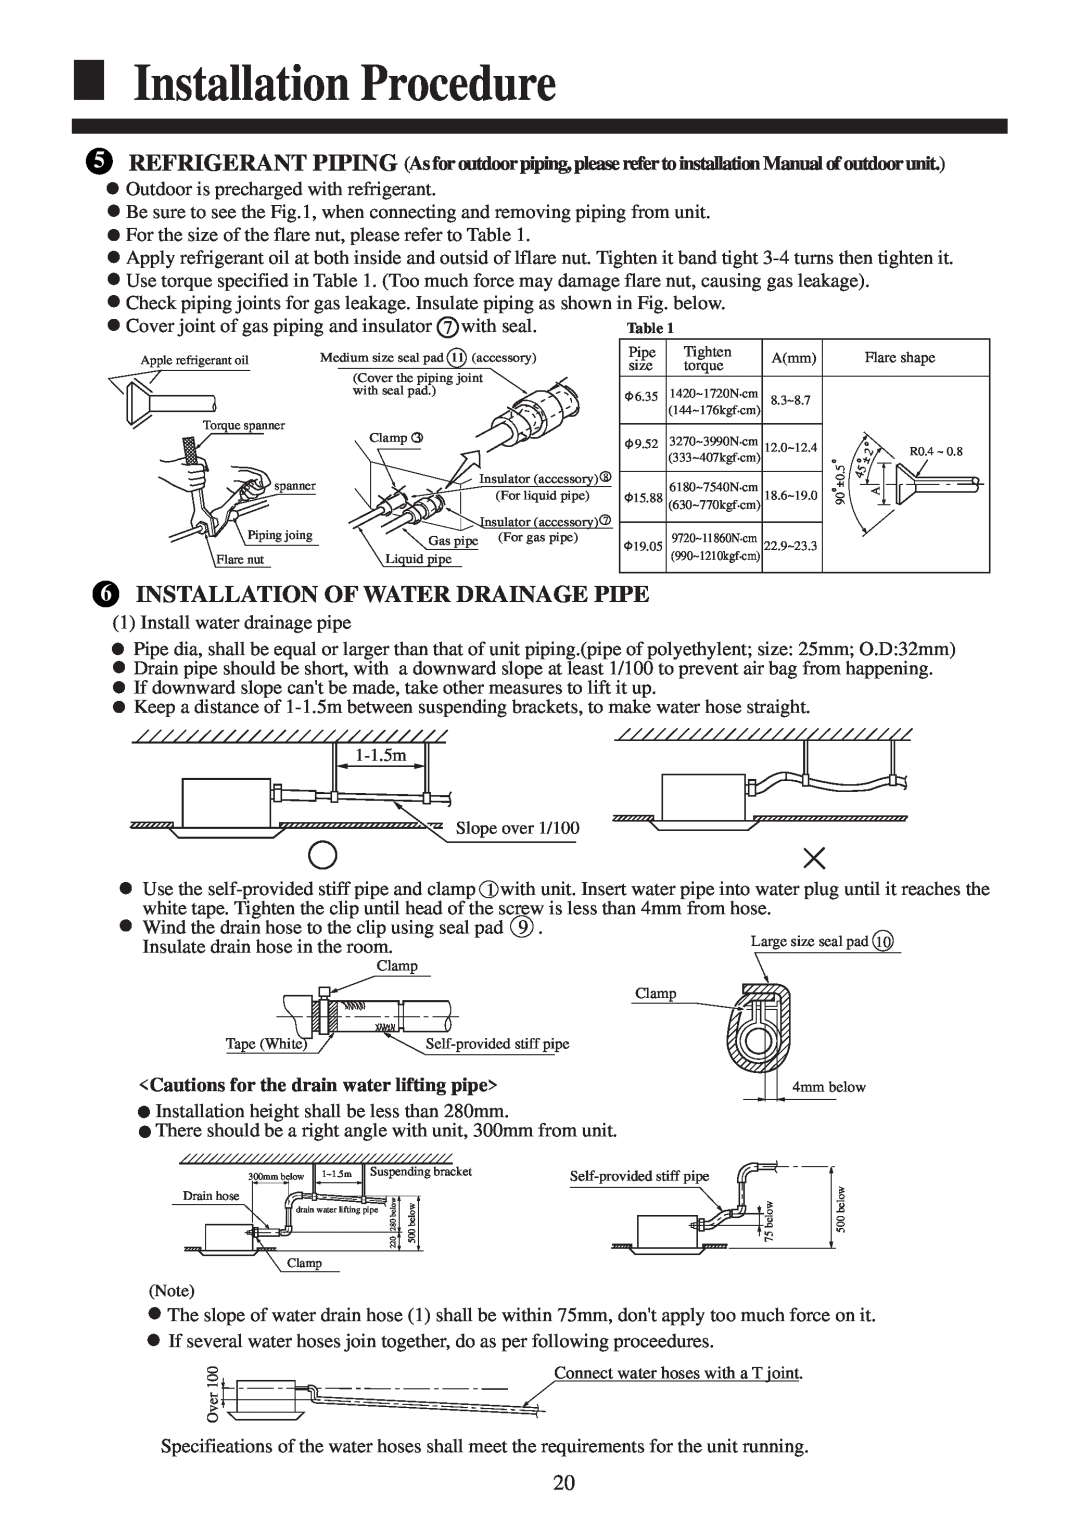 Haier HBU-18HF03 Installation Procedure, Installation Of Water Drainage Pipe, Cautions for the drain water lifting pipe 